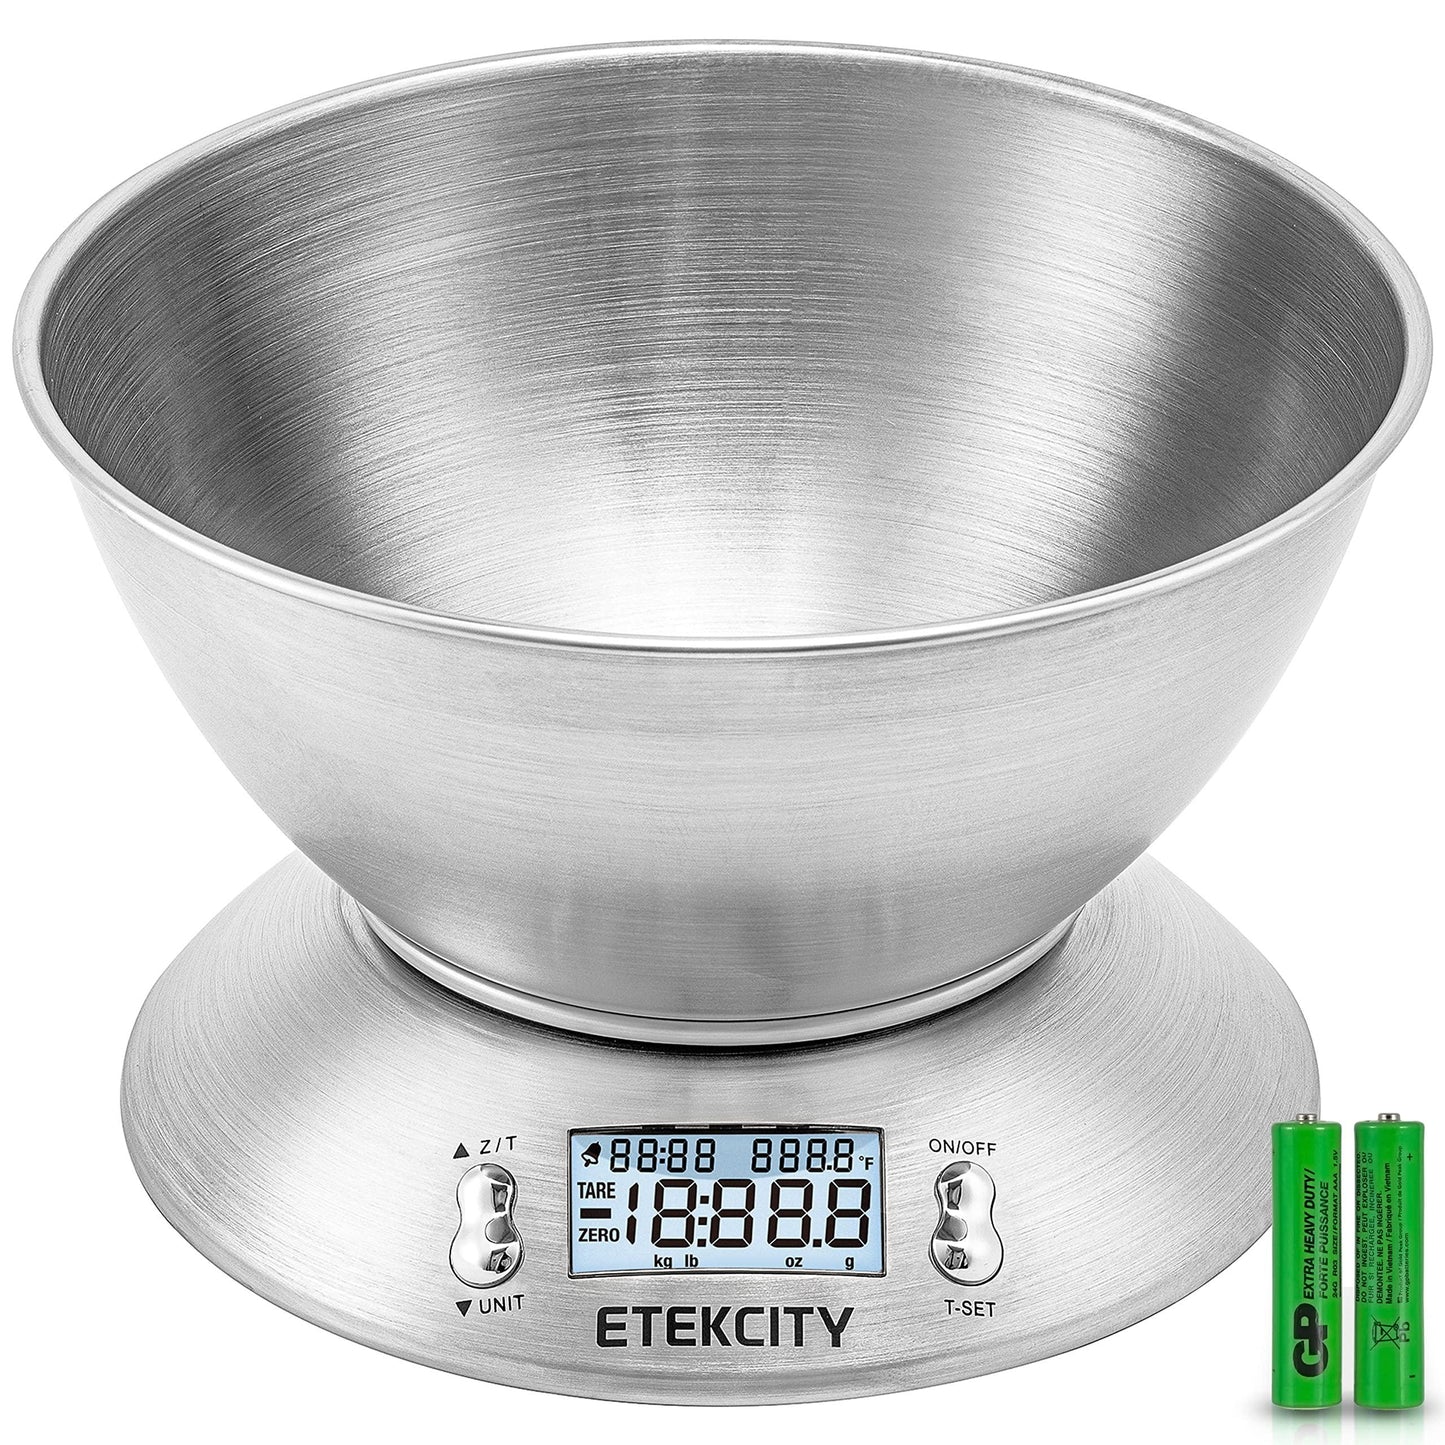 Etekcity Food Kitchen Scale with Bowl, Digital Weight Scale for Food Ounces and Grams, Cooking and Baking, Timer, and Temperature Sensor, 2.06 QT, Stainless Steel - CookCave